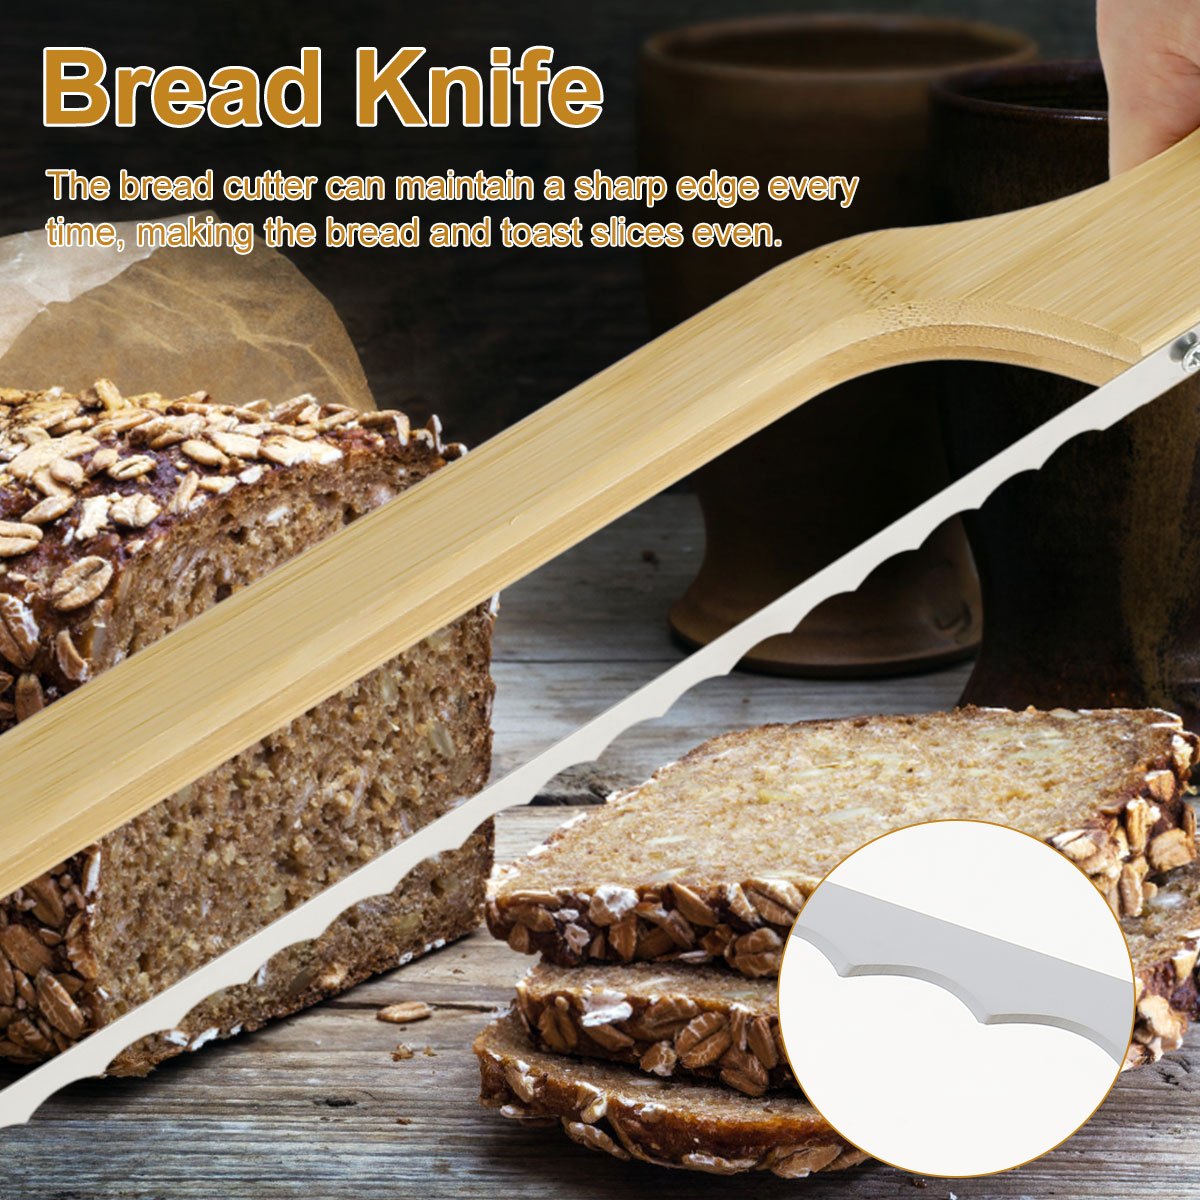 Bamboo Bread Slicer Cutting Guide - Wood Bread Cutter For Homemade Bread,  Loaf Cakes, Bagels Foldable And Compact With Crumbs - AliExpress